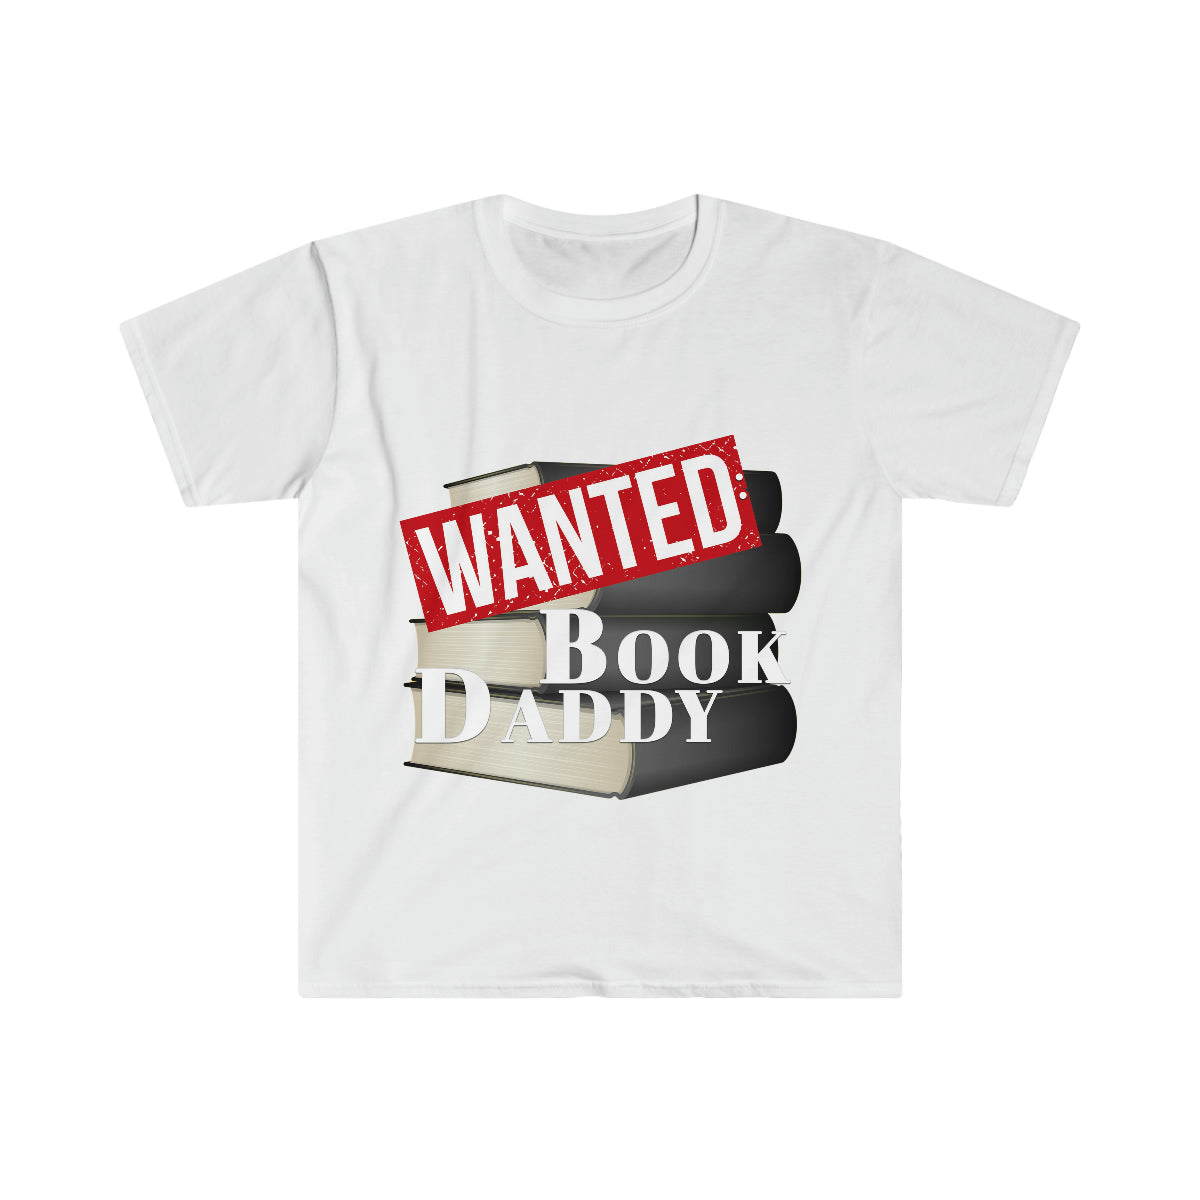 Wanted: Book Daddy - Unisex Softstyle T-Shirt